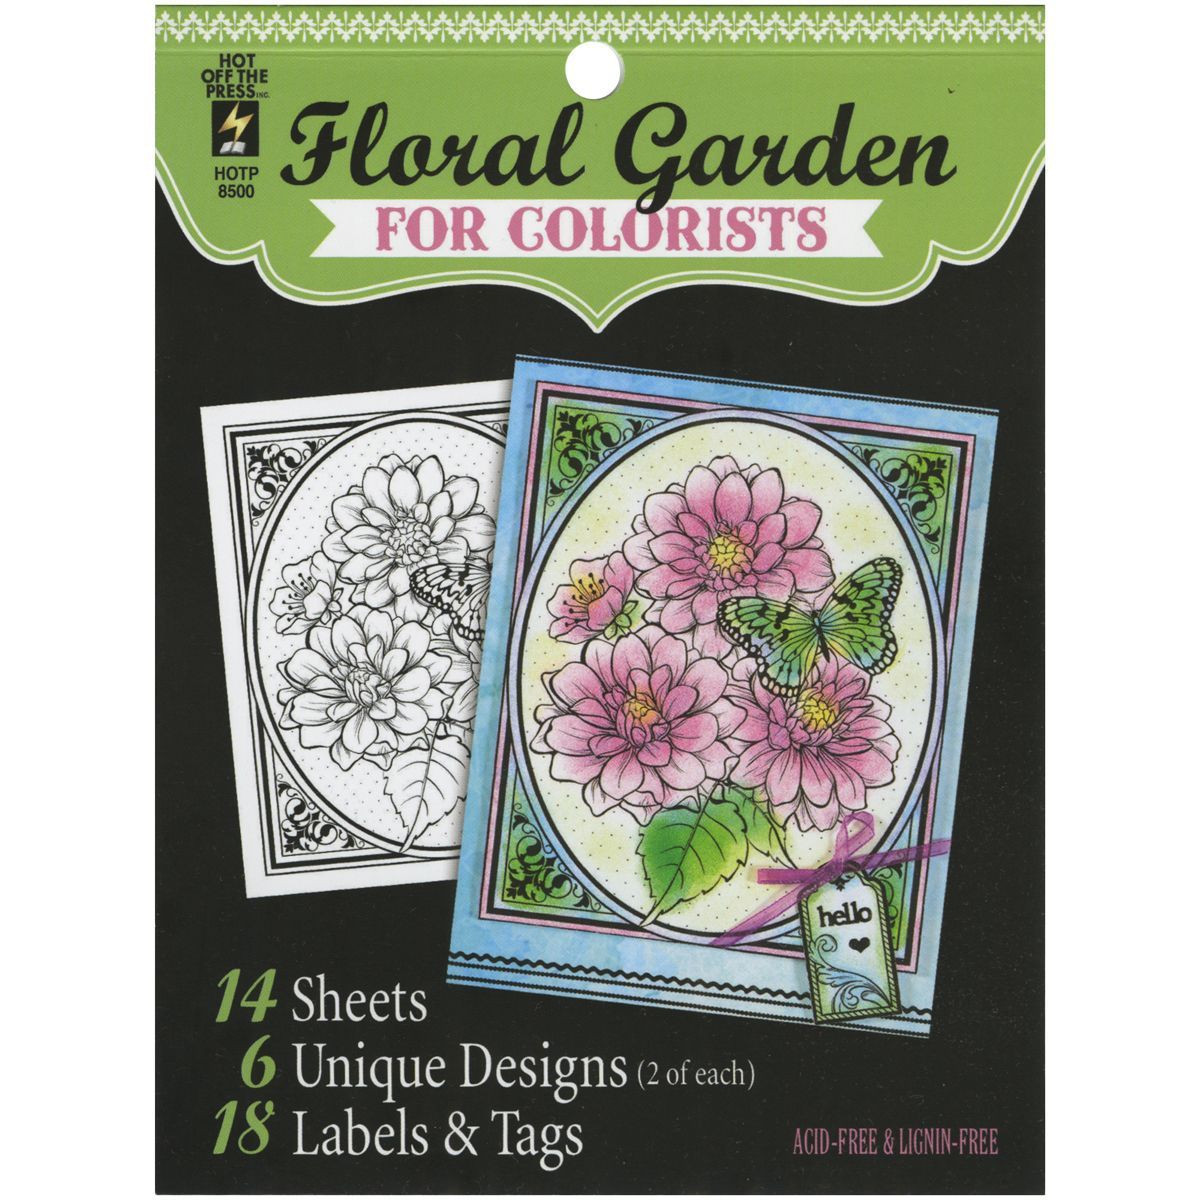 Joann Fabrics Adult Coloring Book
 Hot f The Press Colorist Coloring Book 5inX6in Floral